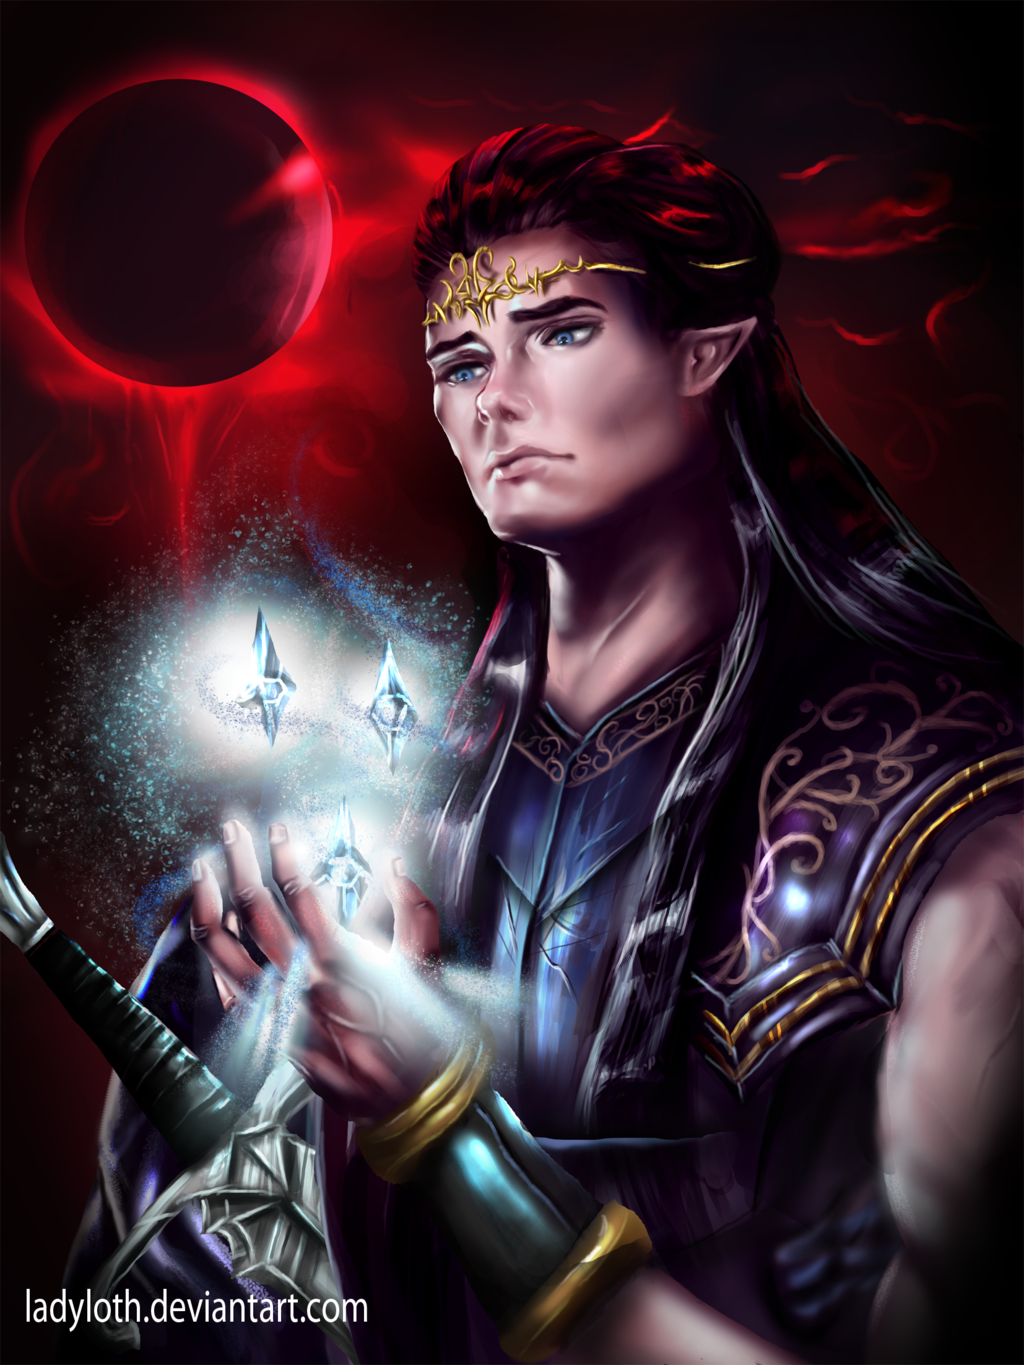 Feanor and his Silmarils